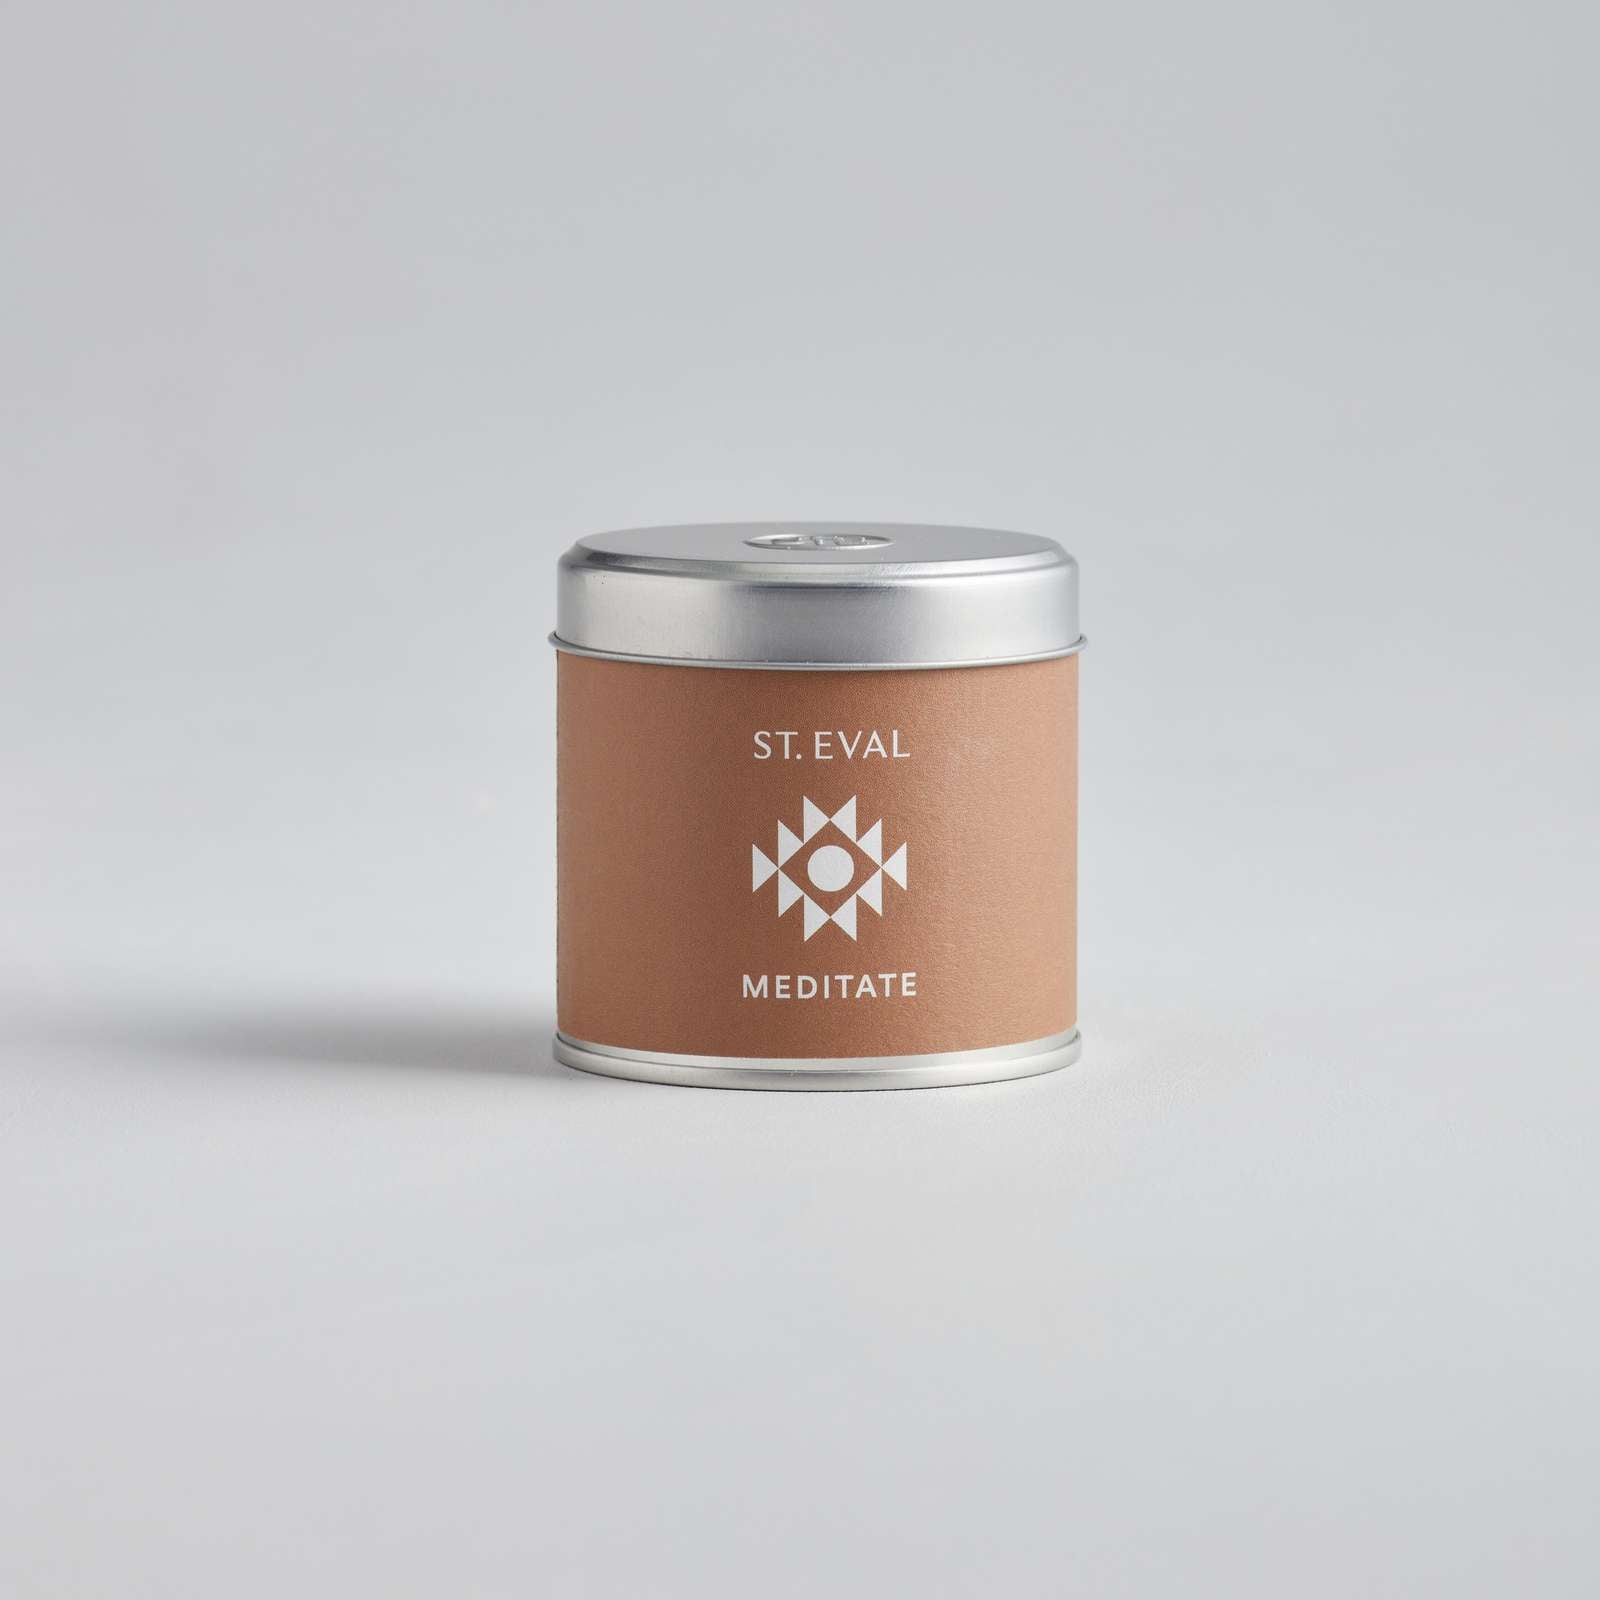 Meditate, Retreat Scented Tin Candle